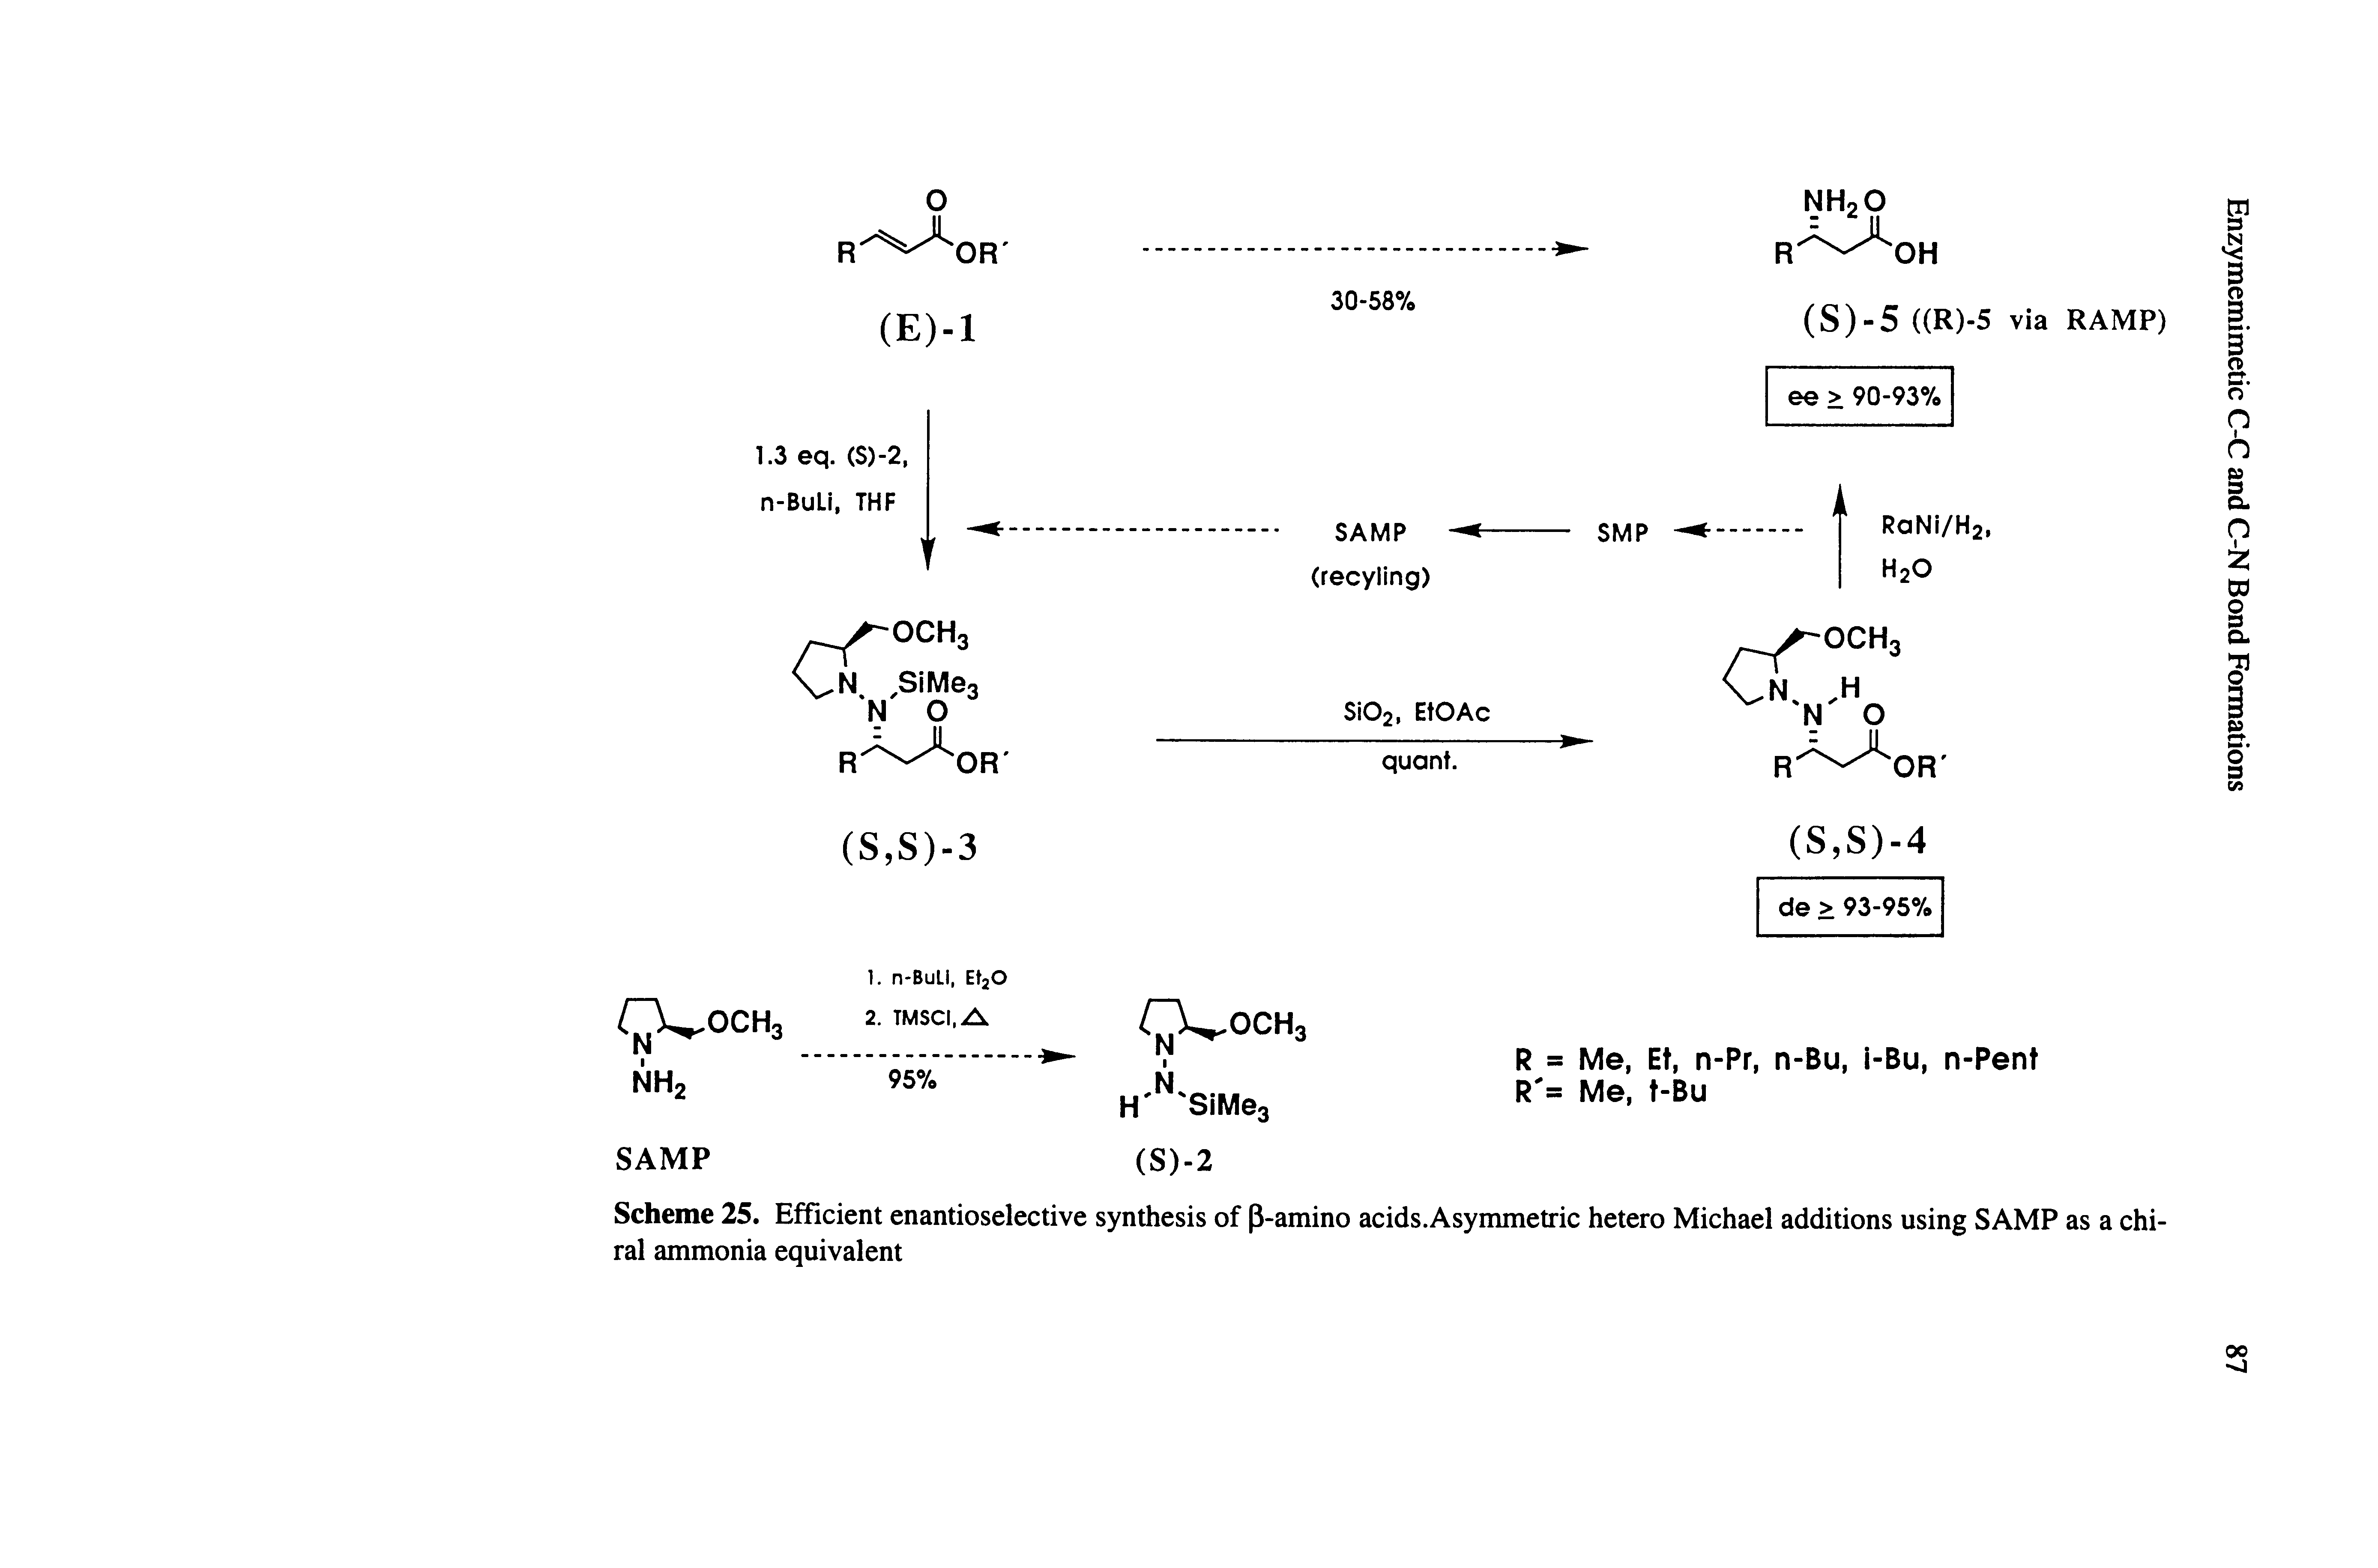 Scheme 25. Efficient enantioselective synthesis of p-amino acids.Asynunetric hetero Michael additions using SAMP as a chiral ammonia equivalent...